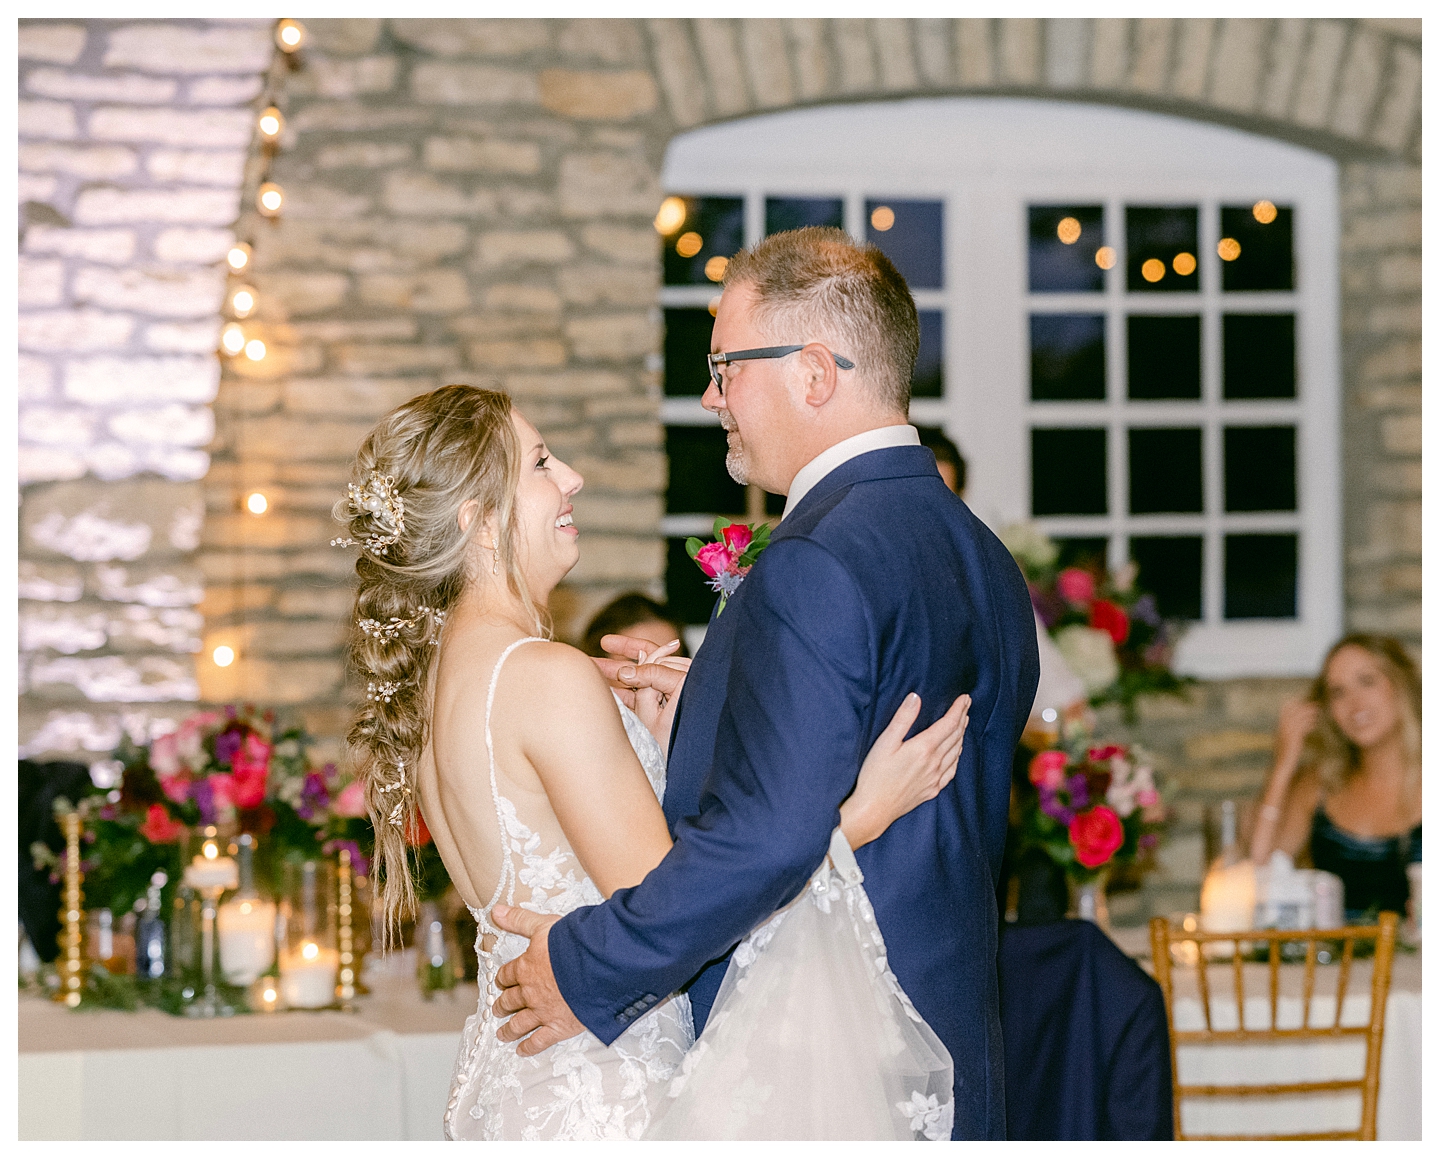 The bride dances with her dad at a Mayowood Stone Barn Wedding. Photo by Kayla Lee.